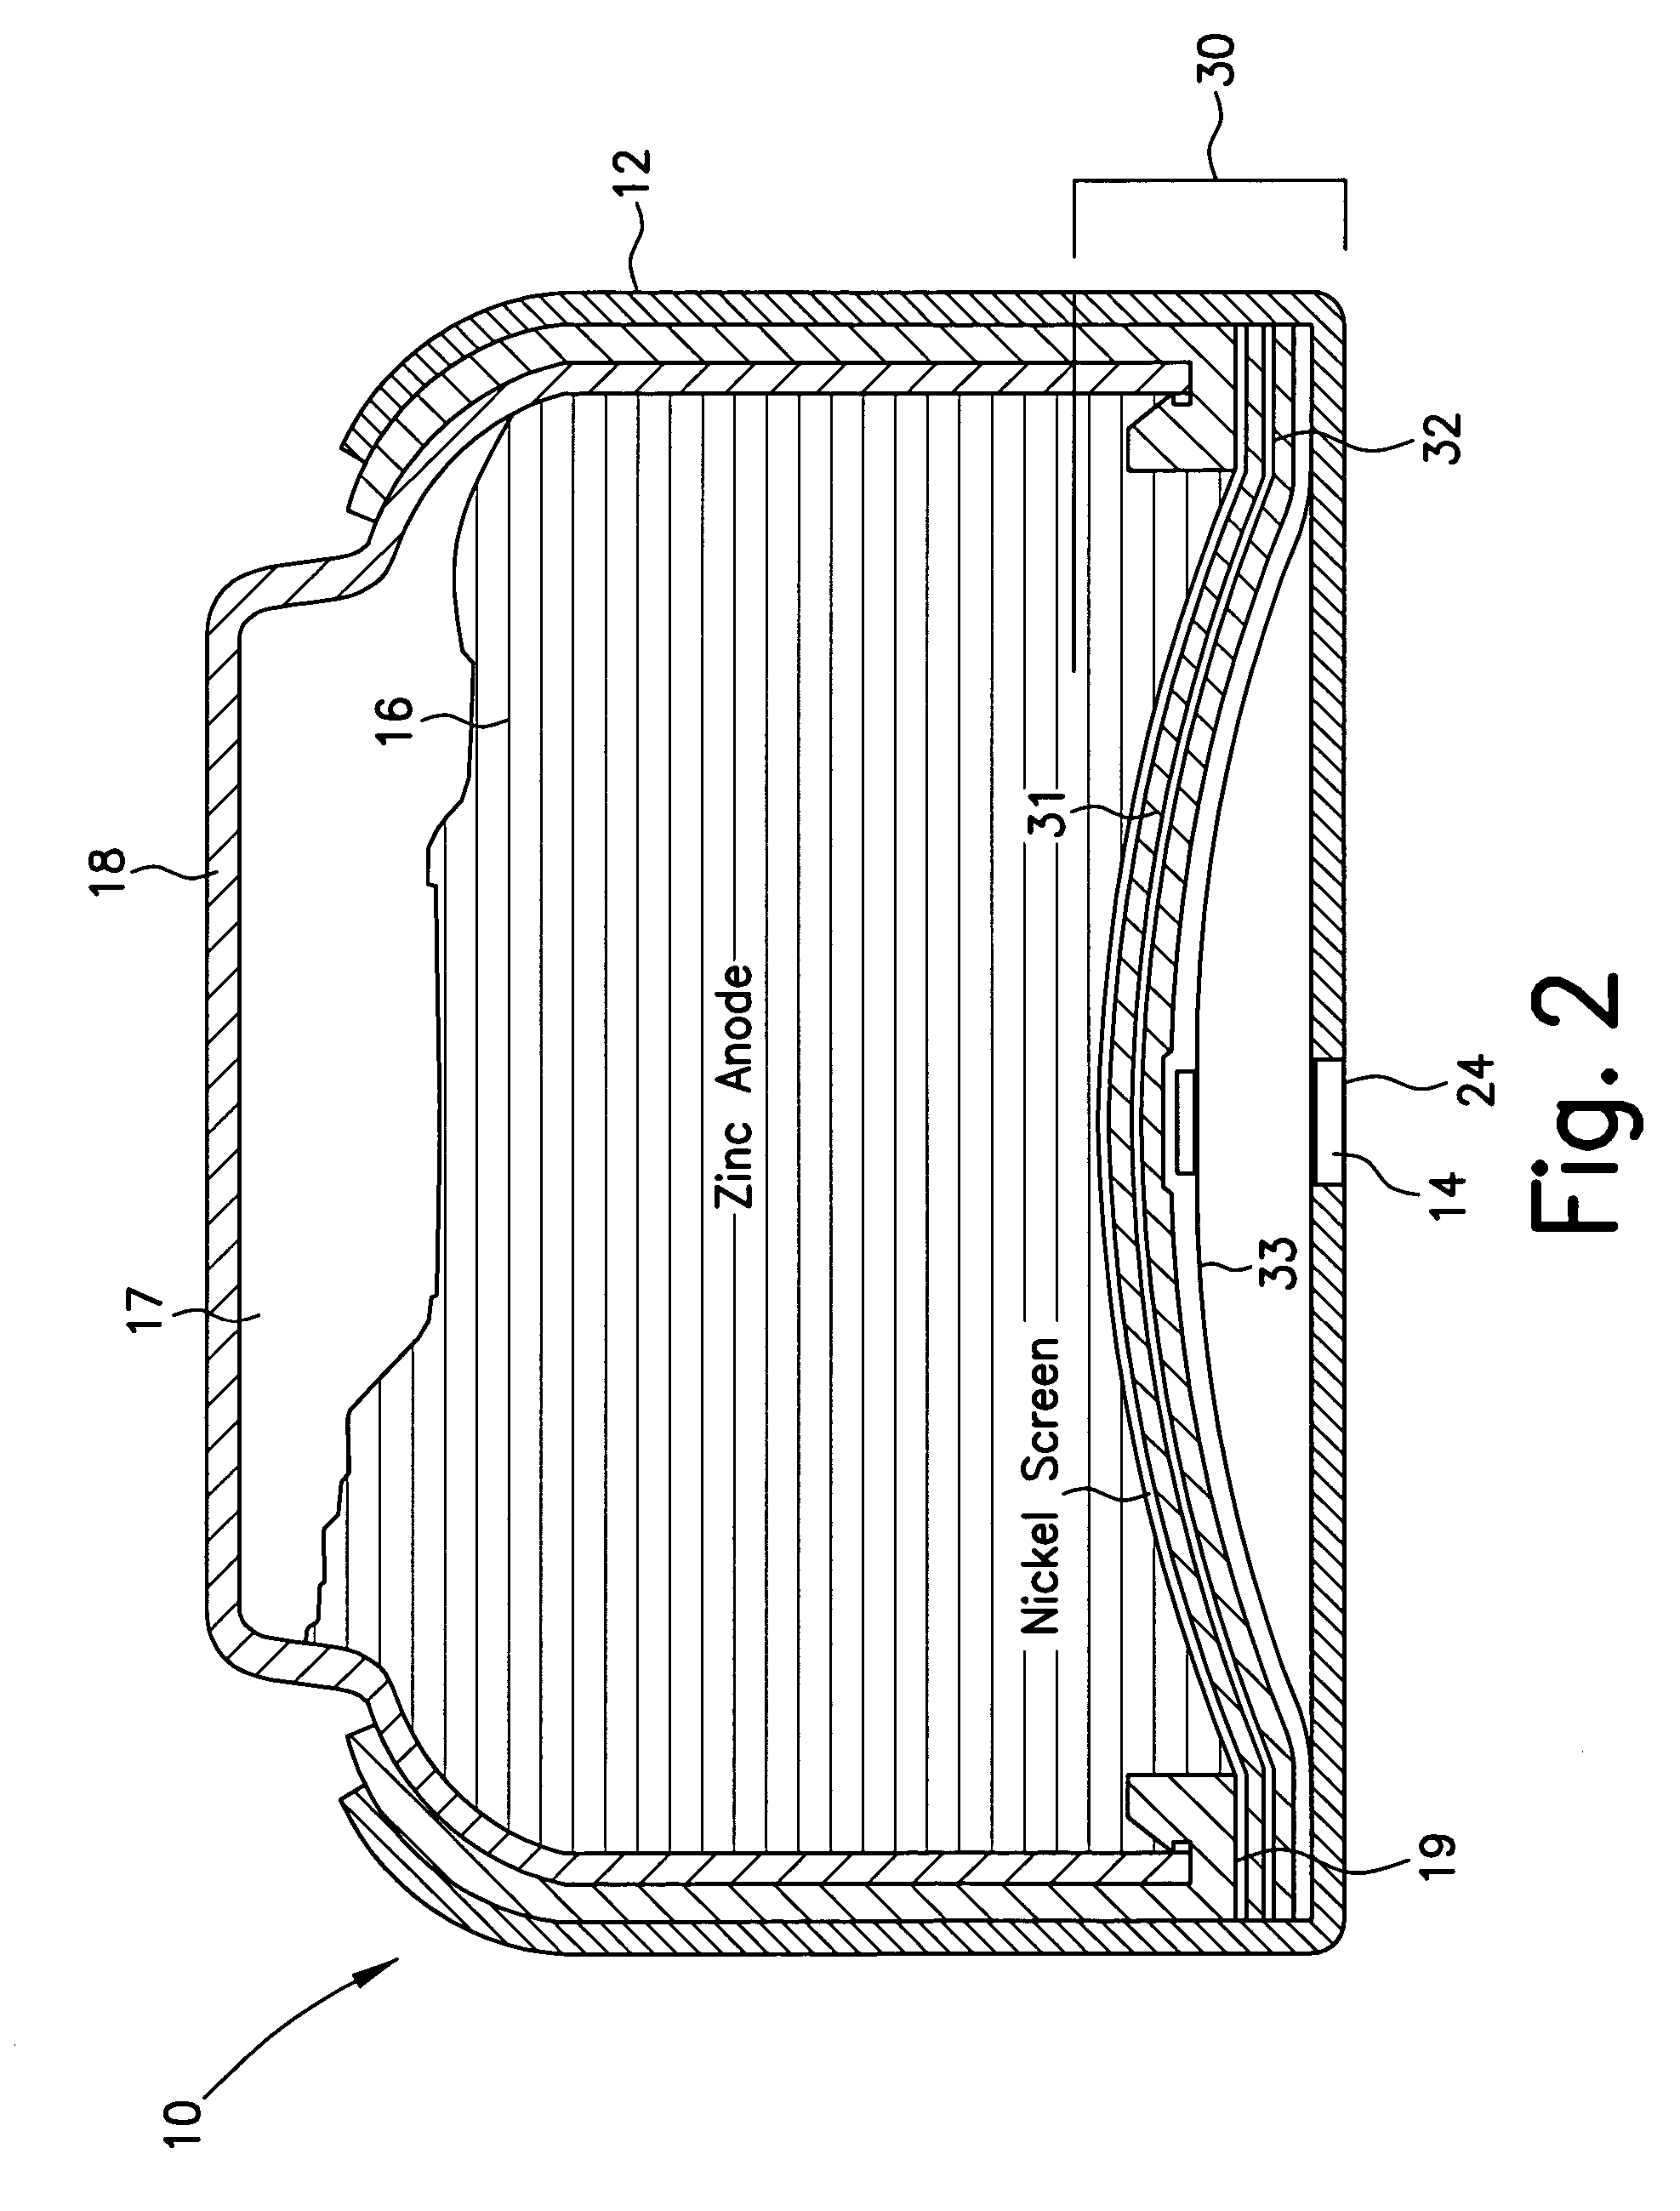 Zinc/air battery with improved lifetime